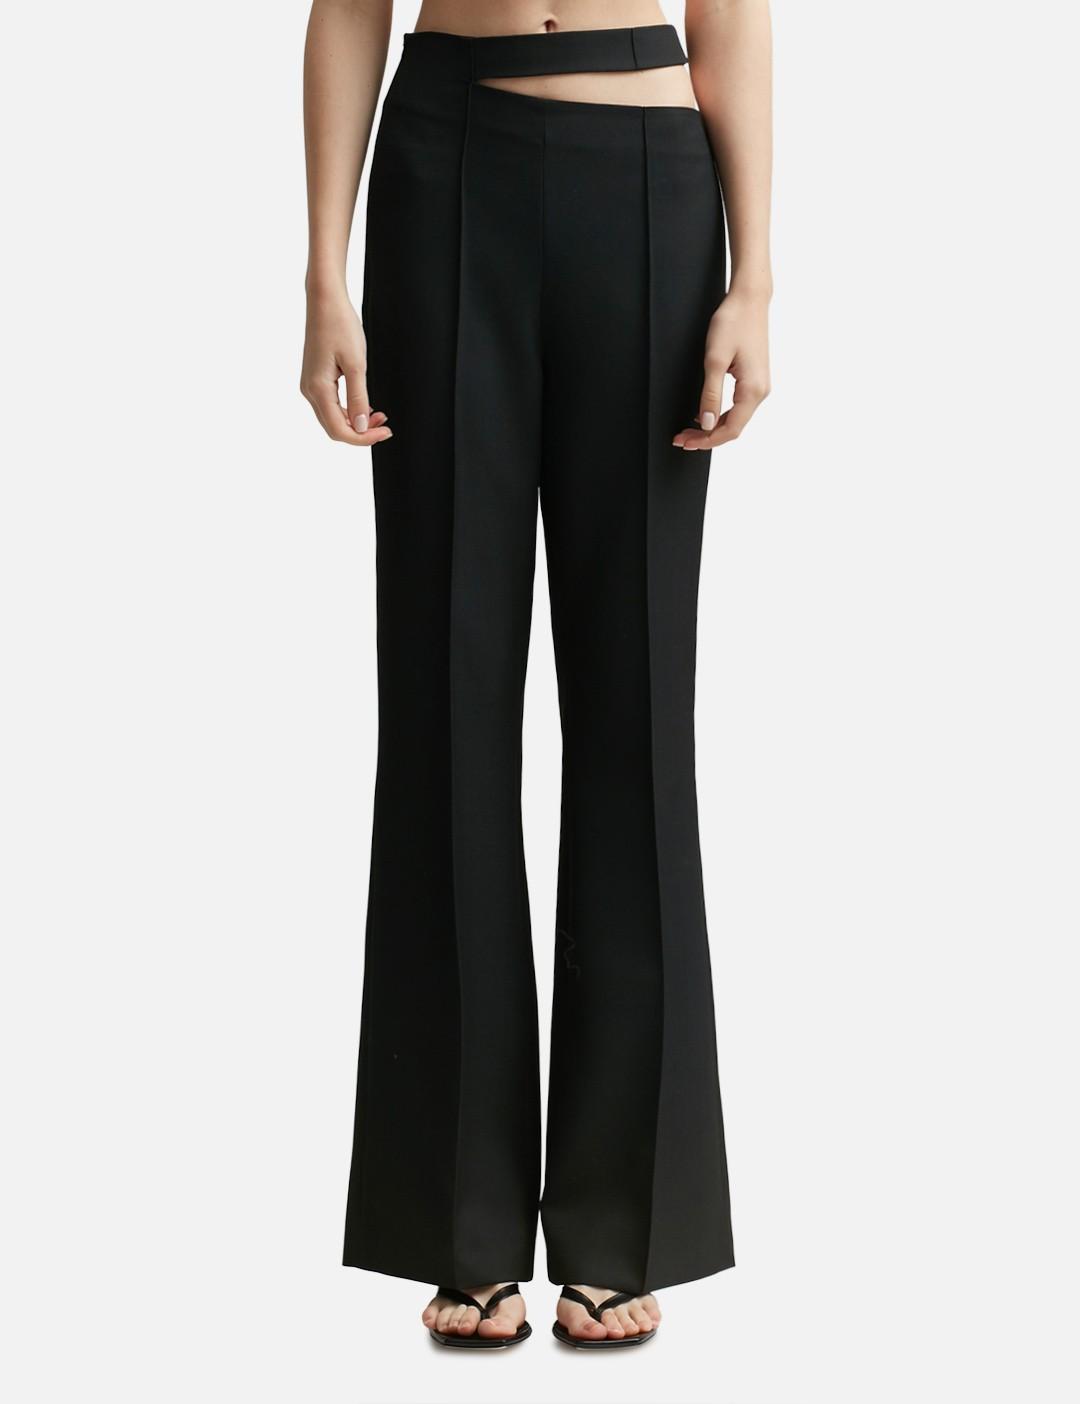 Rohe Cut Out Pants in Black | Lyst